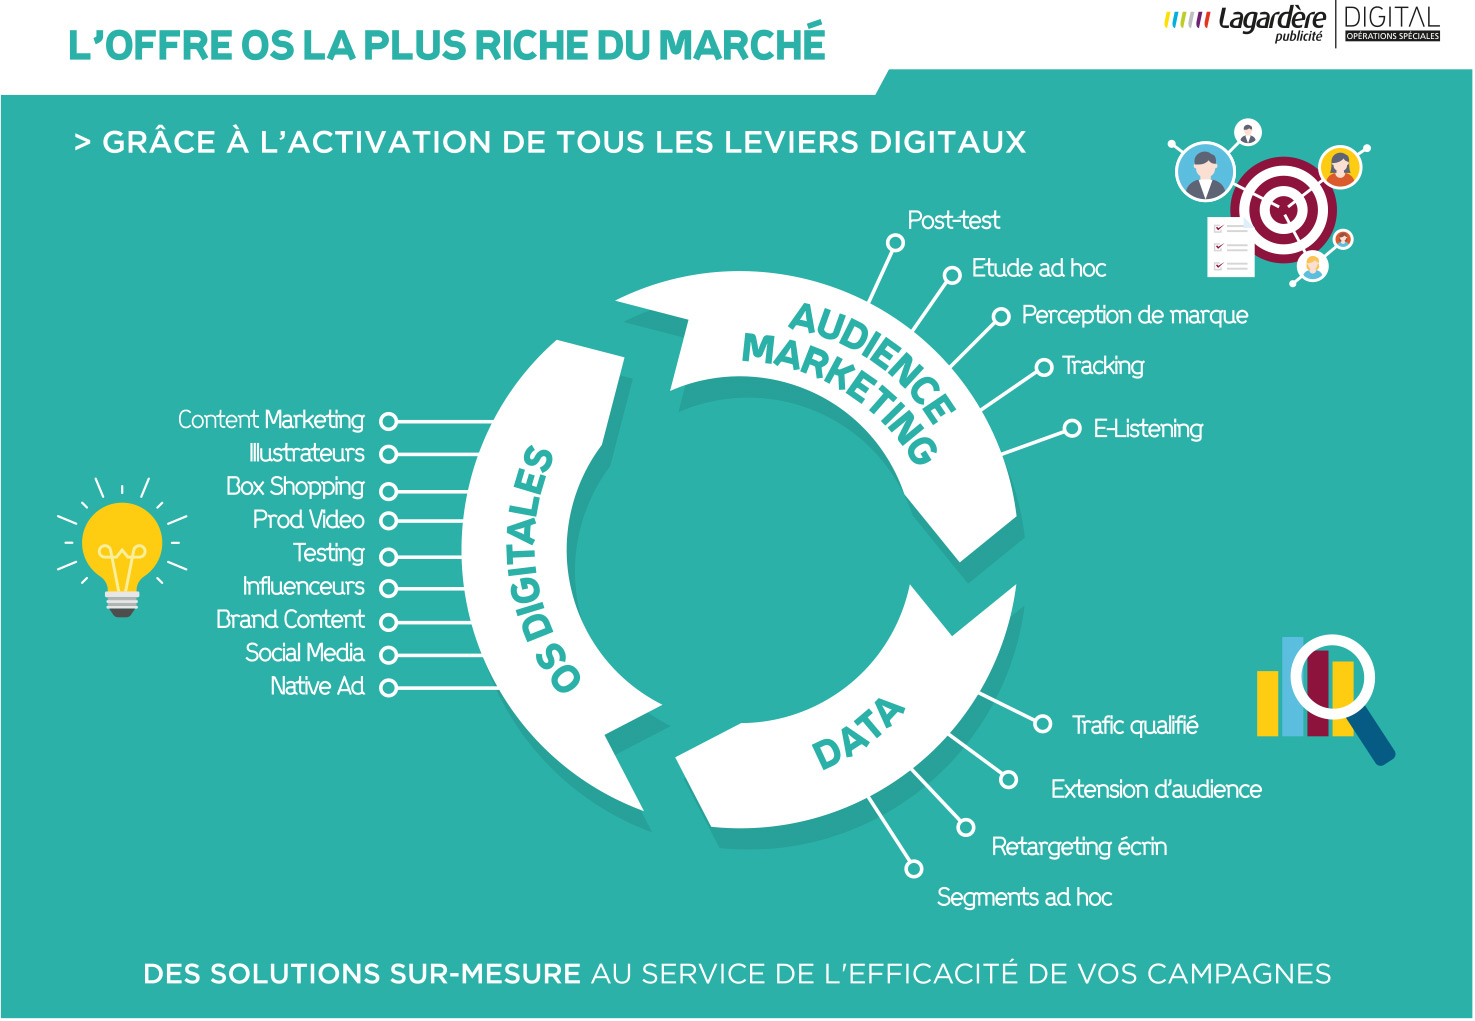 infographie-lagardere-operations-speciales